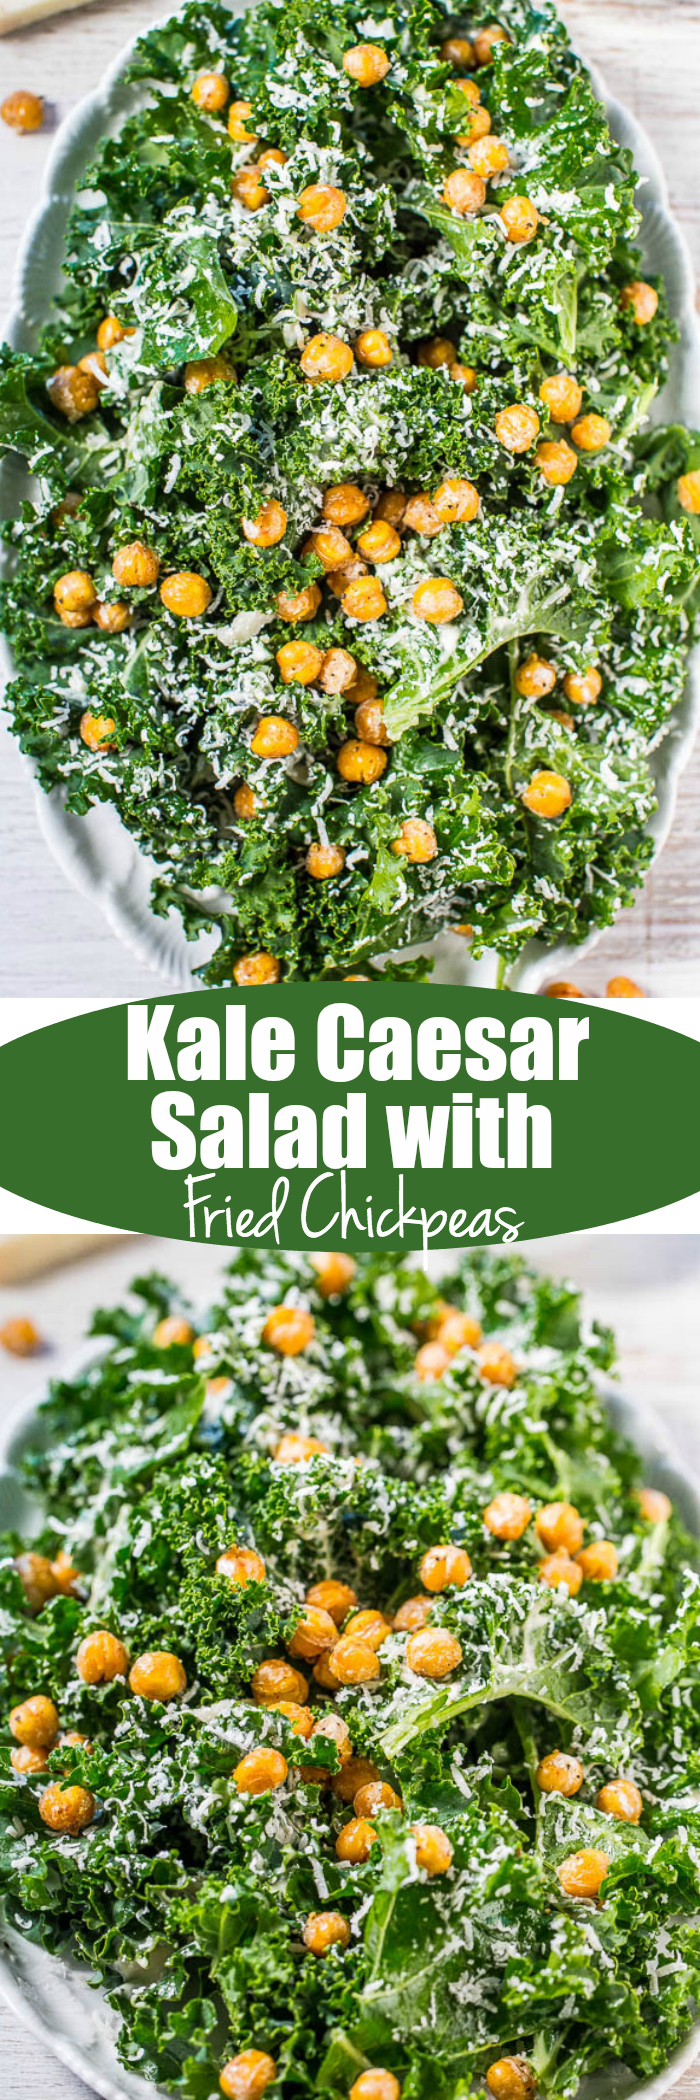 Kale Caesar Salad with Fried Chickpeas - A fresh spin on Caesar salad with an easy, whisk-together dressing loaded with bold flavor!! You won't miss croutons when you've got crispy, crunchy fried chickpeas that are insanely good!!